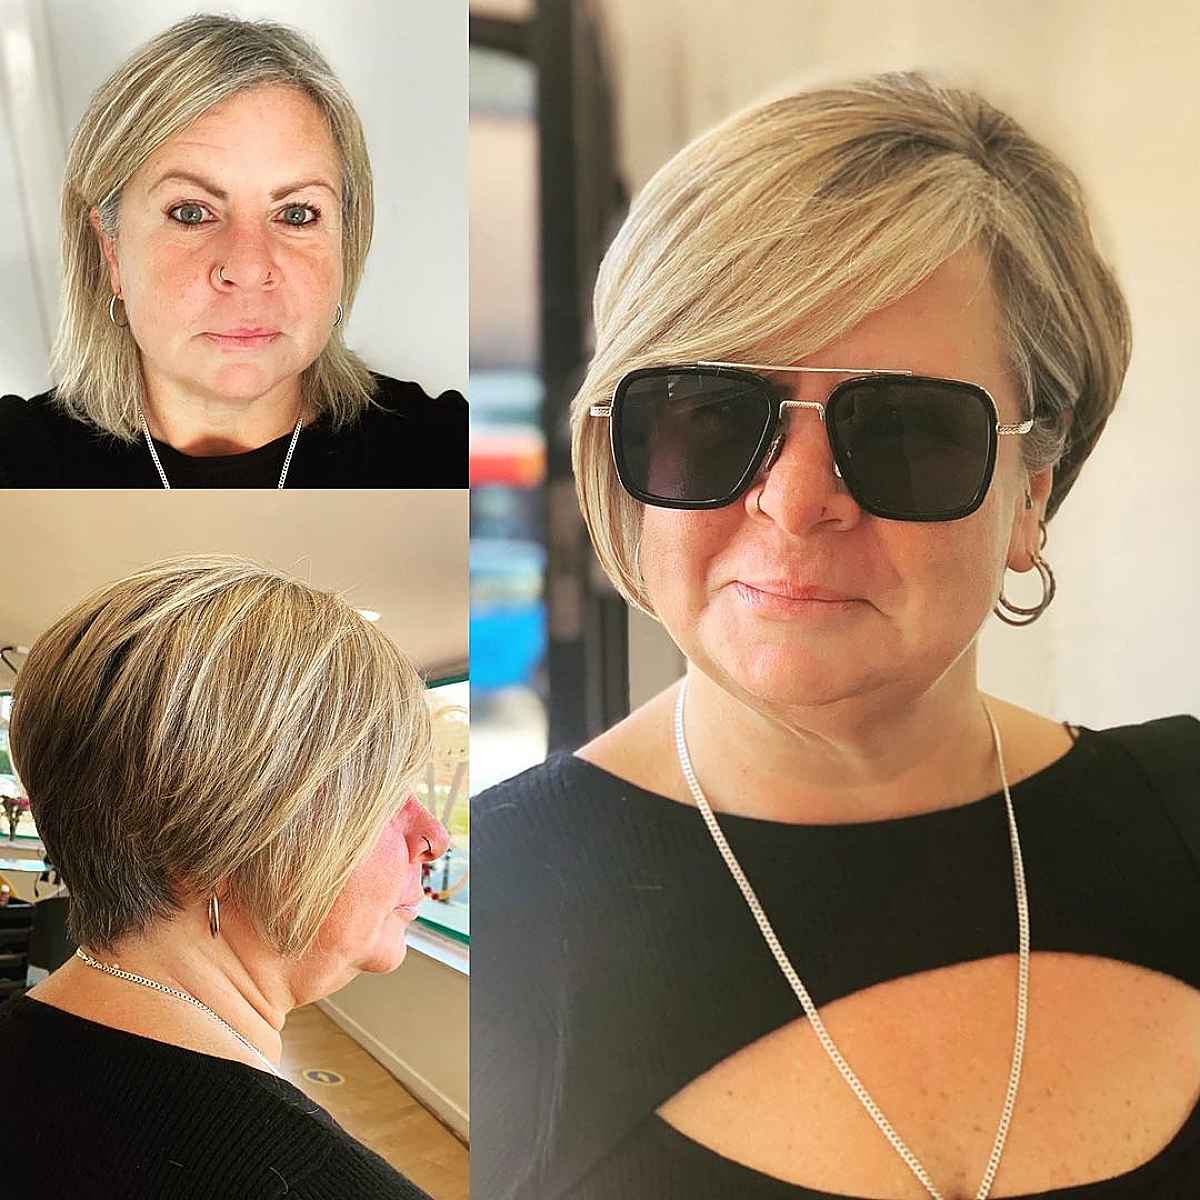 Long Pixie Bob for women past their fifties and overweight